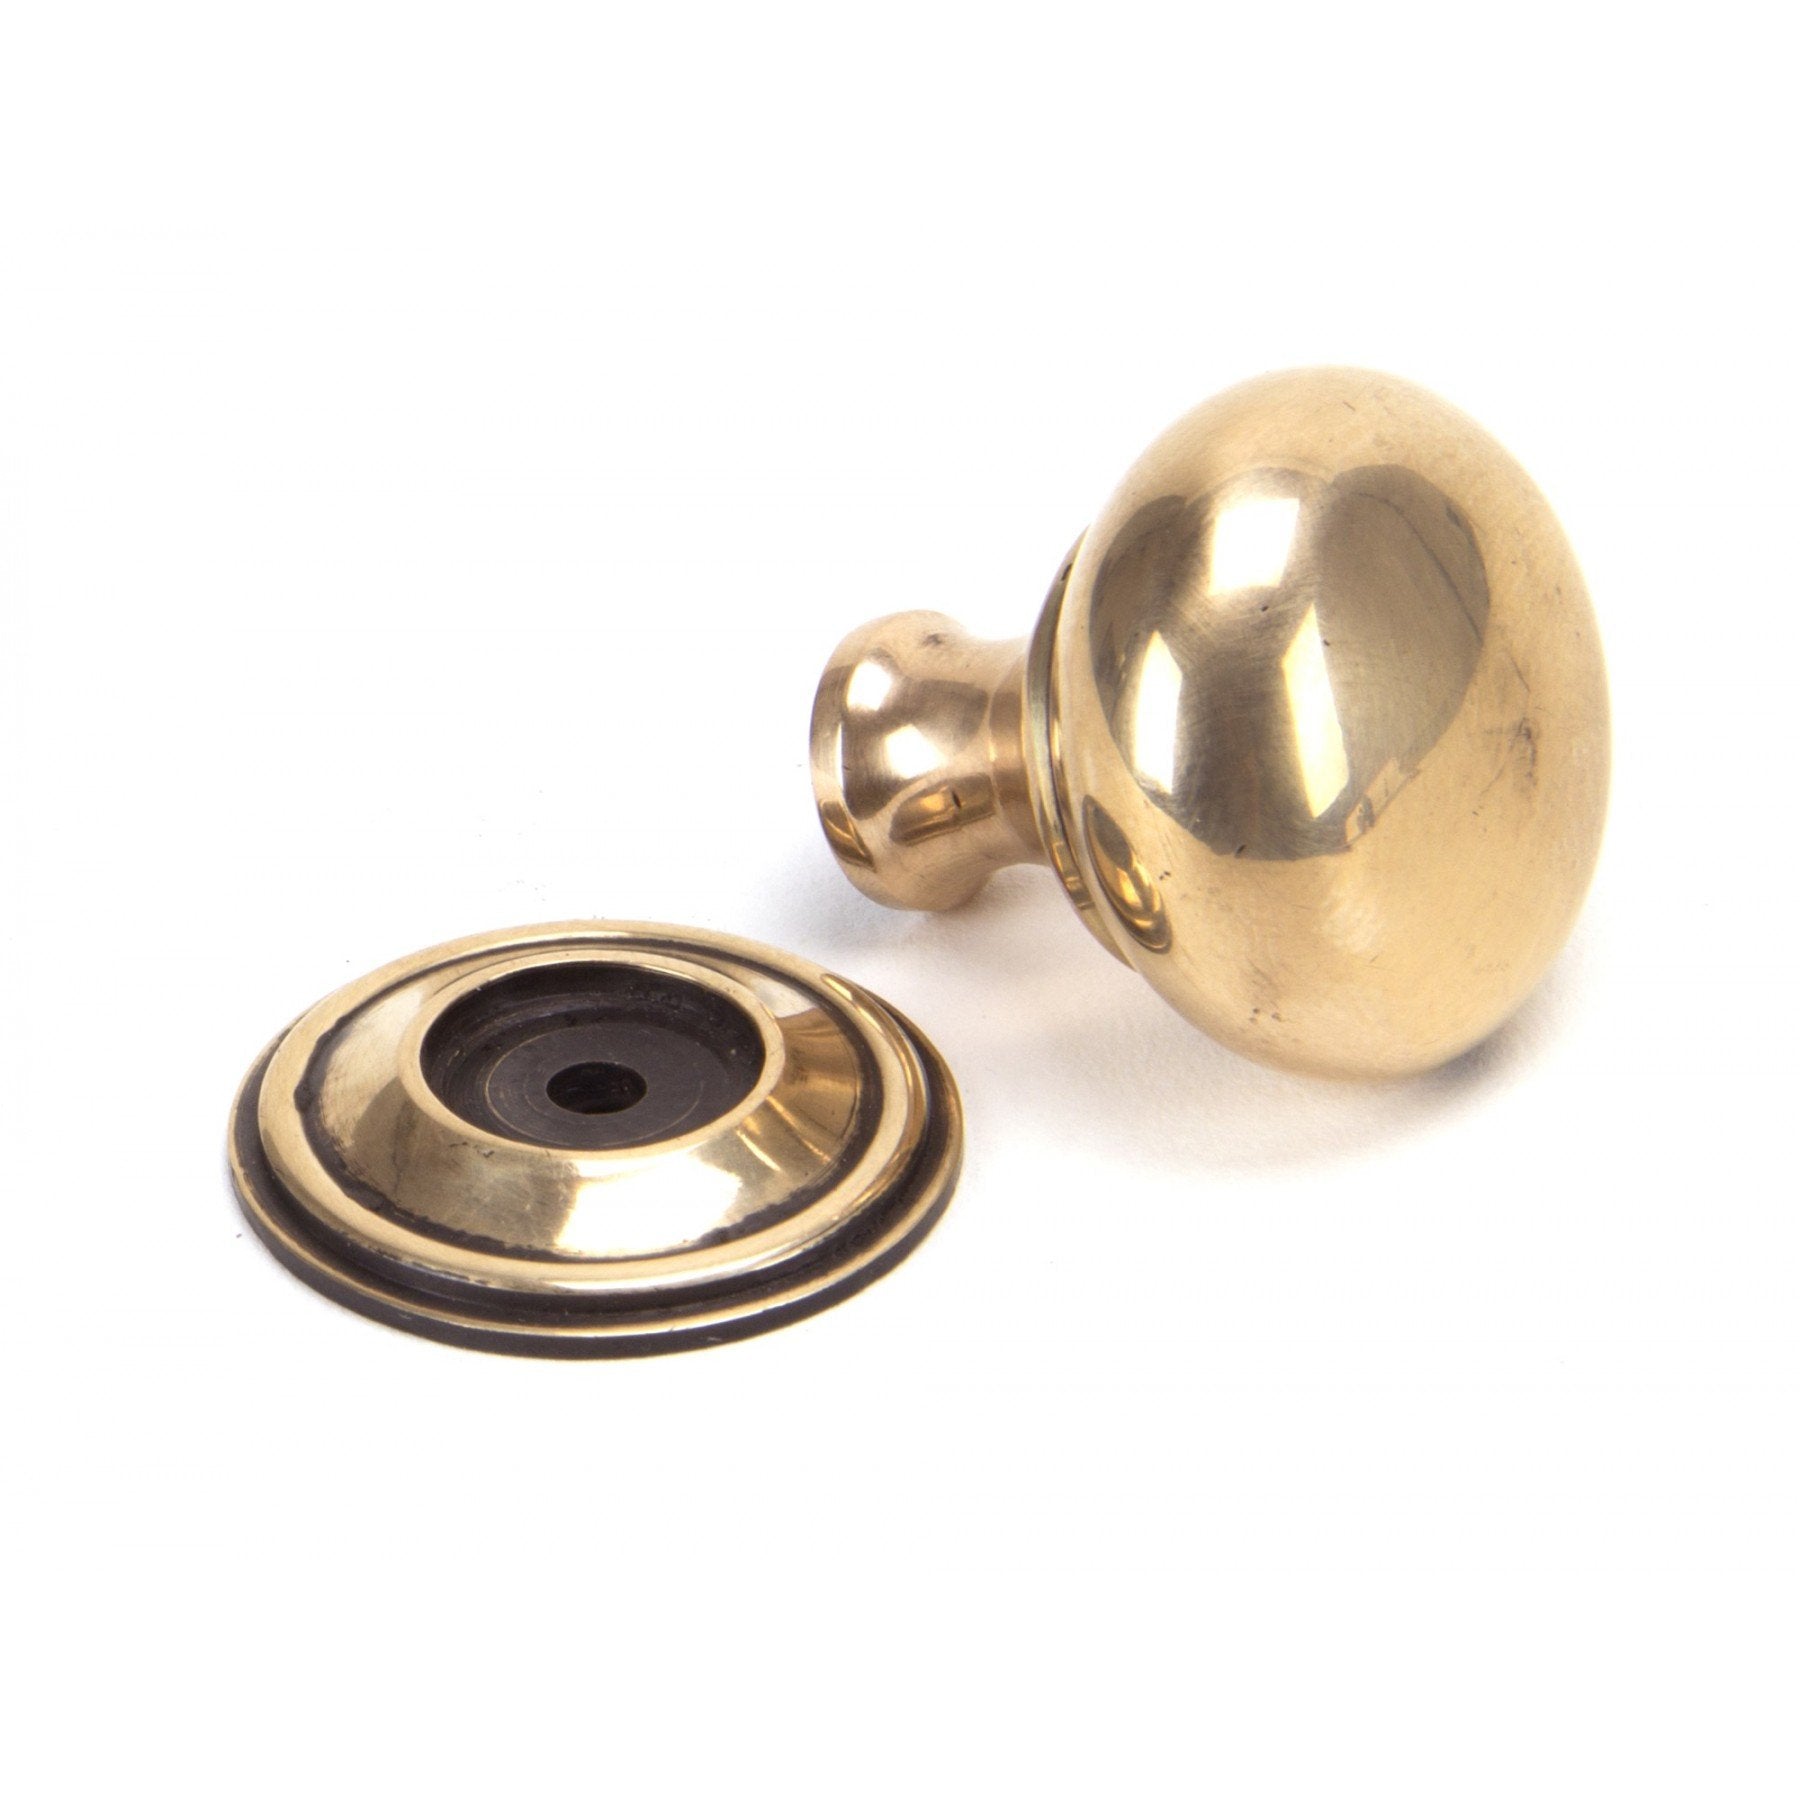 From The Anvil Polished Bronze Mushroom Cabinet Knob - Small